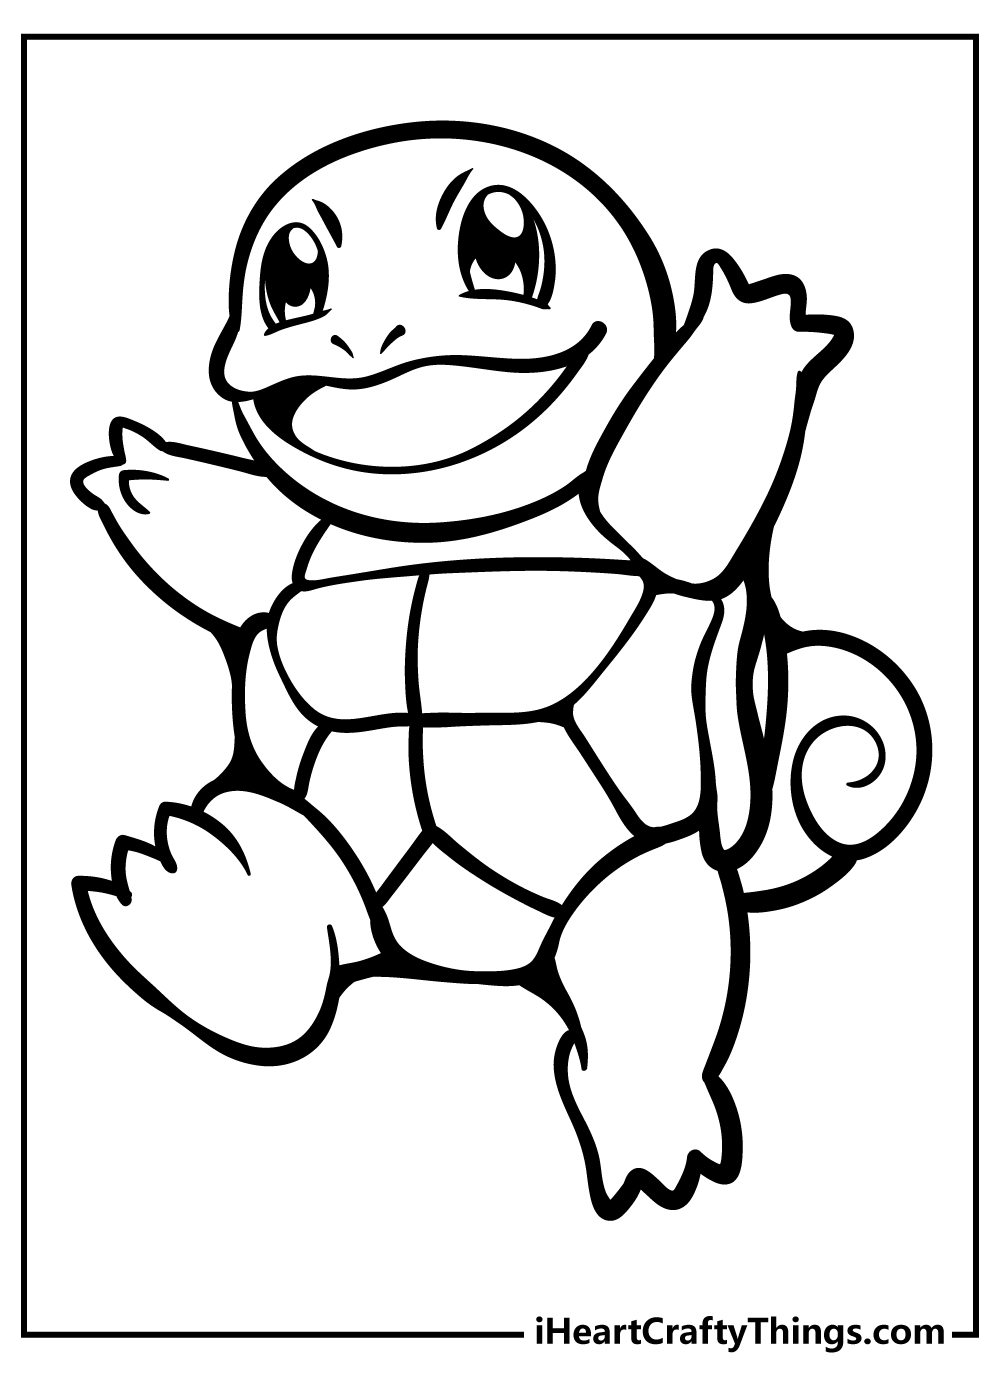 Pokemon Coloring Pages for kids free download